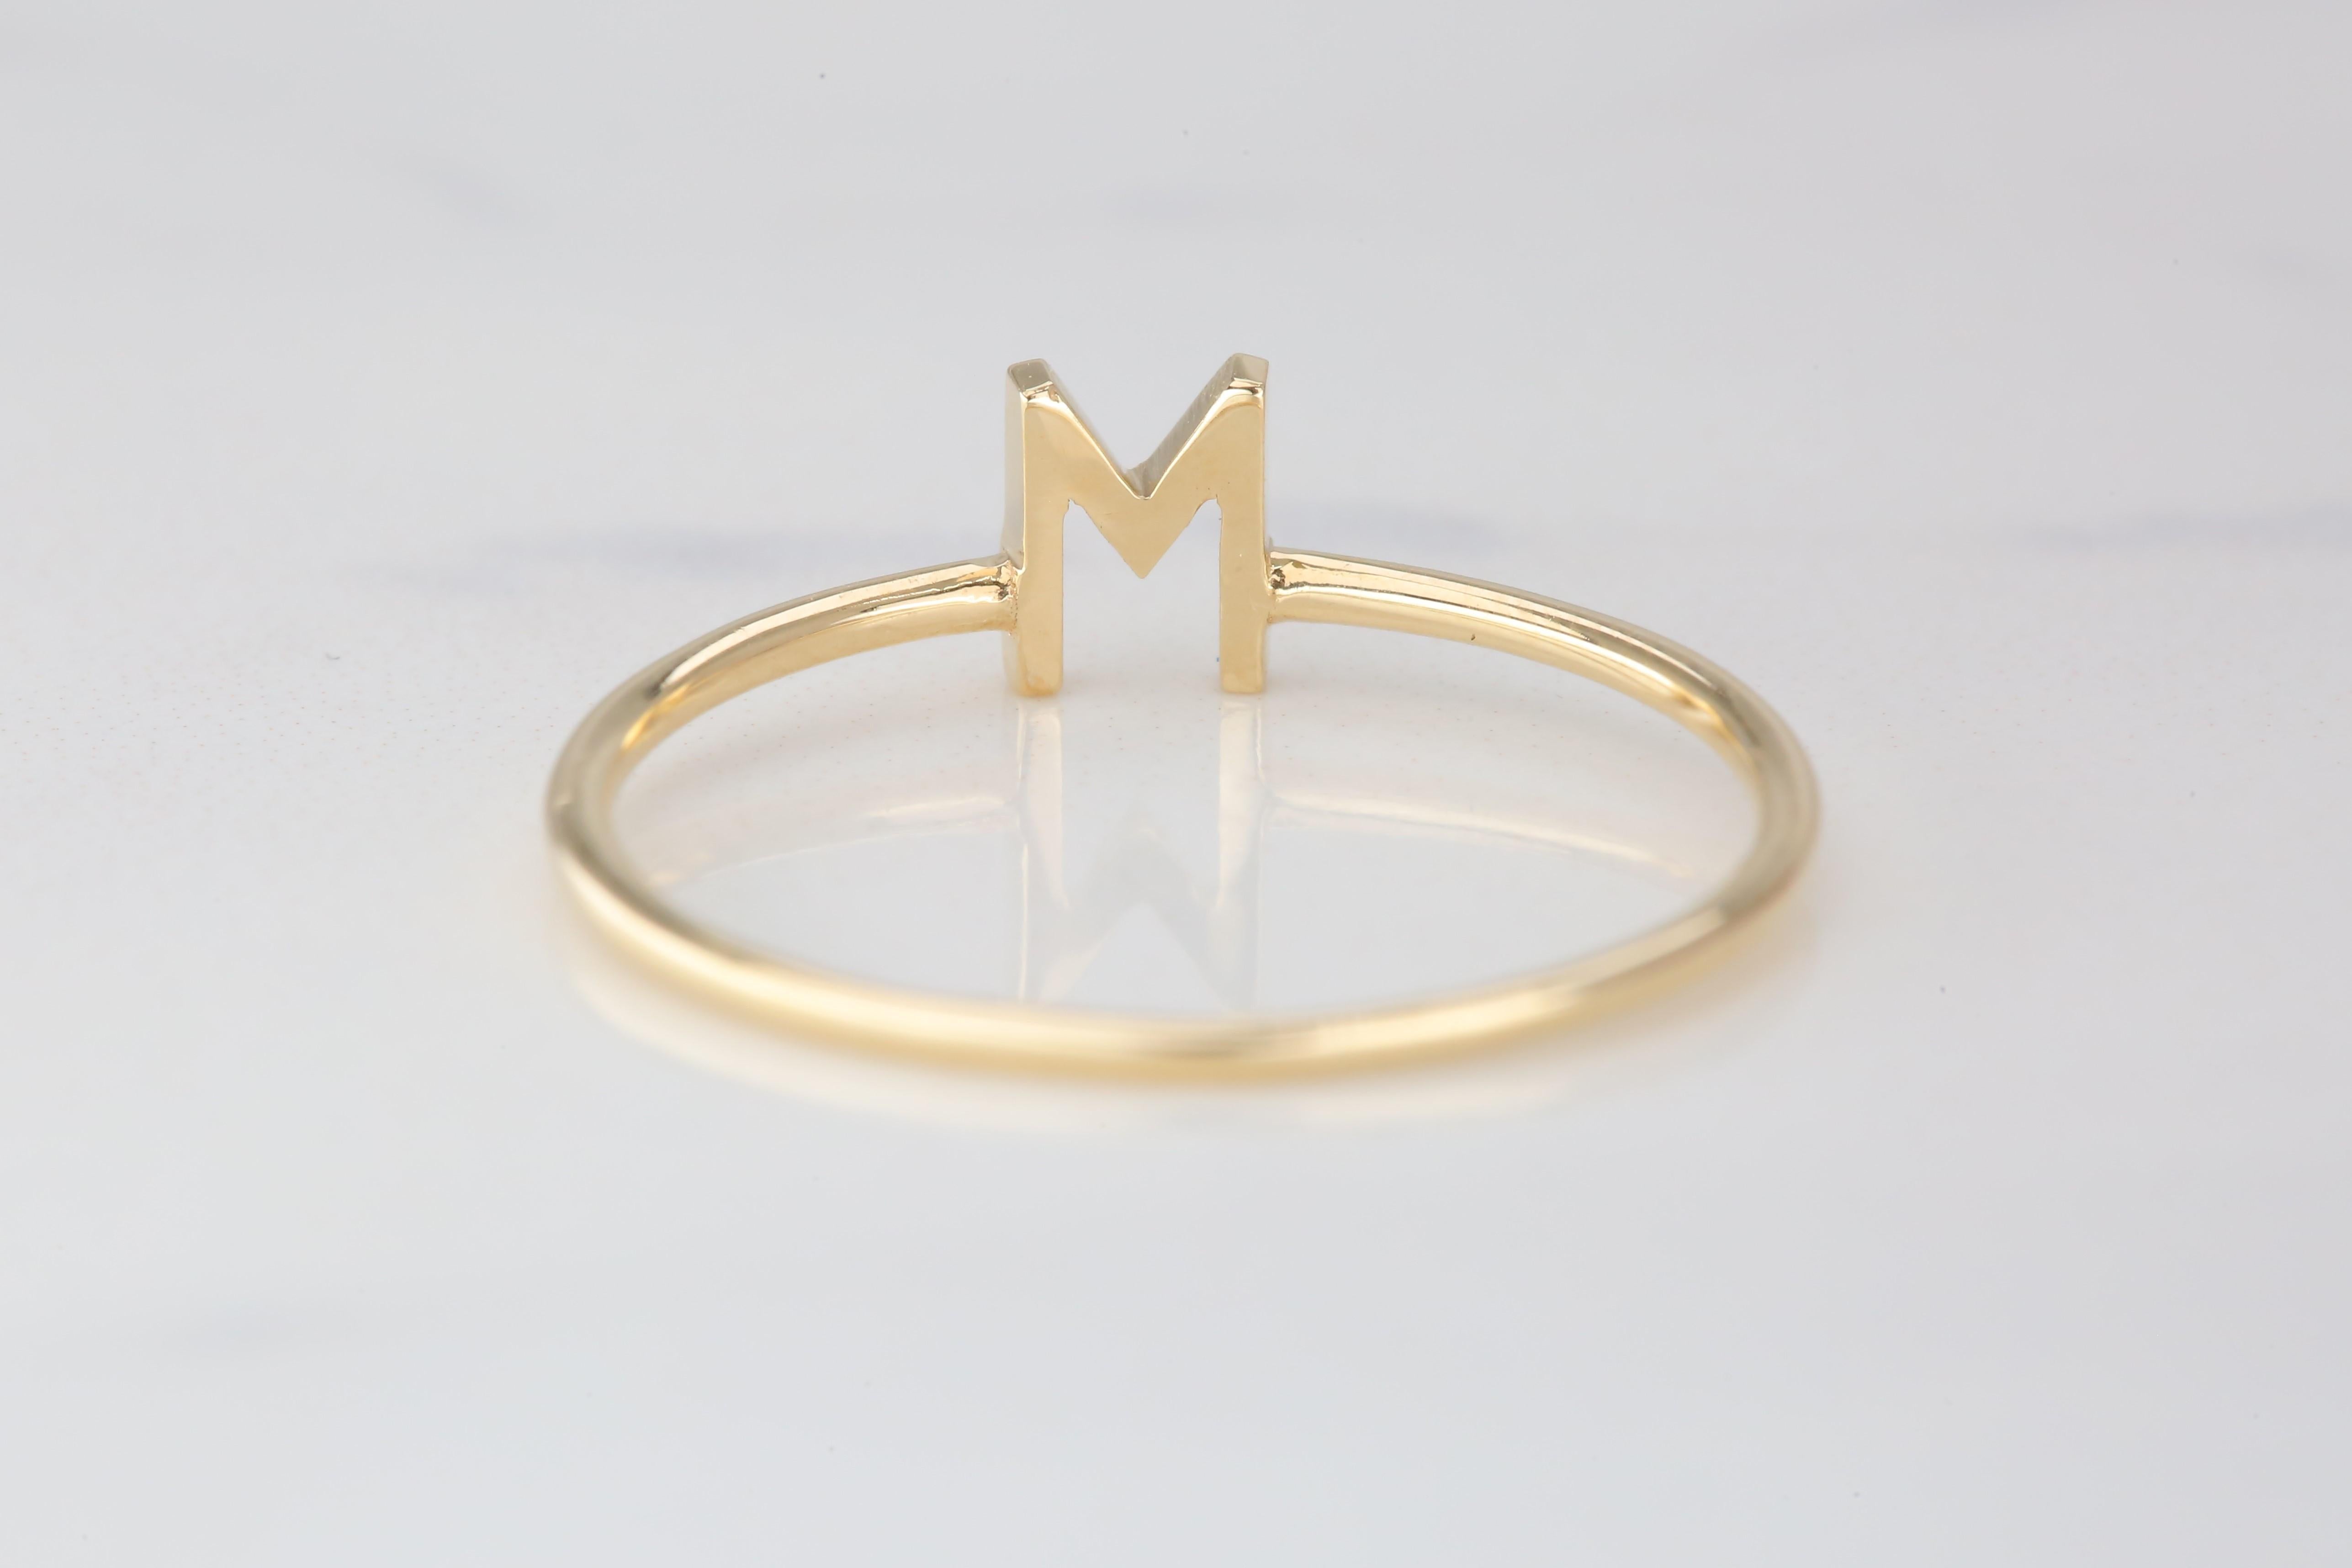 For Sale:  14K Gold Initial M Letter Ring, Personalized Initial Letter Ring 6